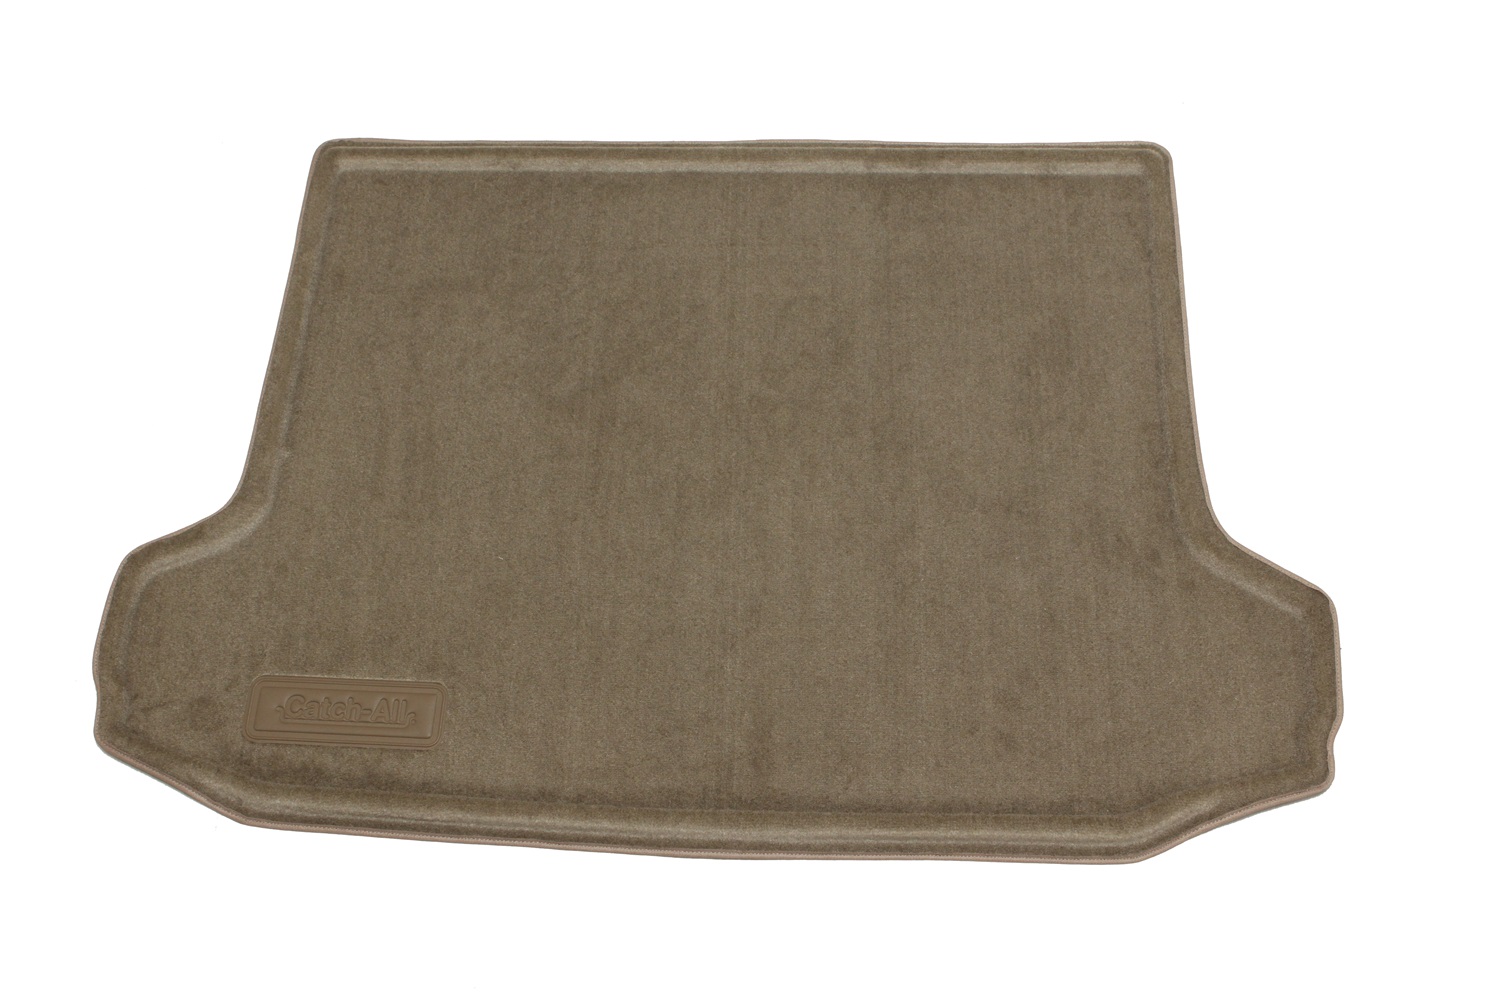 Nifty Nifty 611539 Catch-All; Premium Floor Protection-Cargo Mat Fits 00 Tahoe Yukon